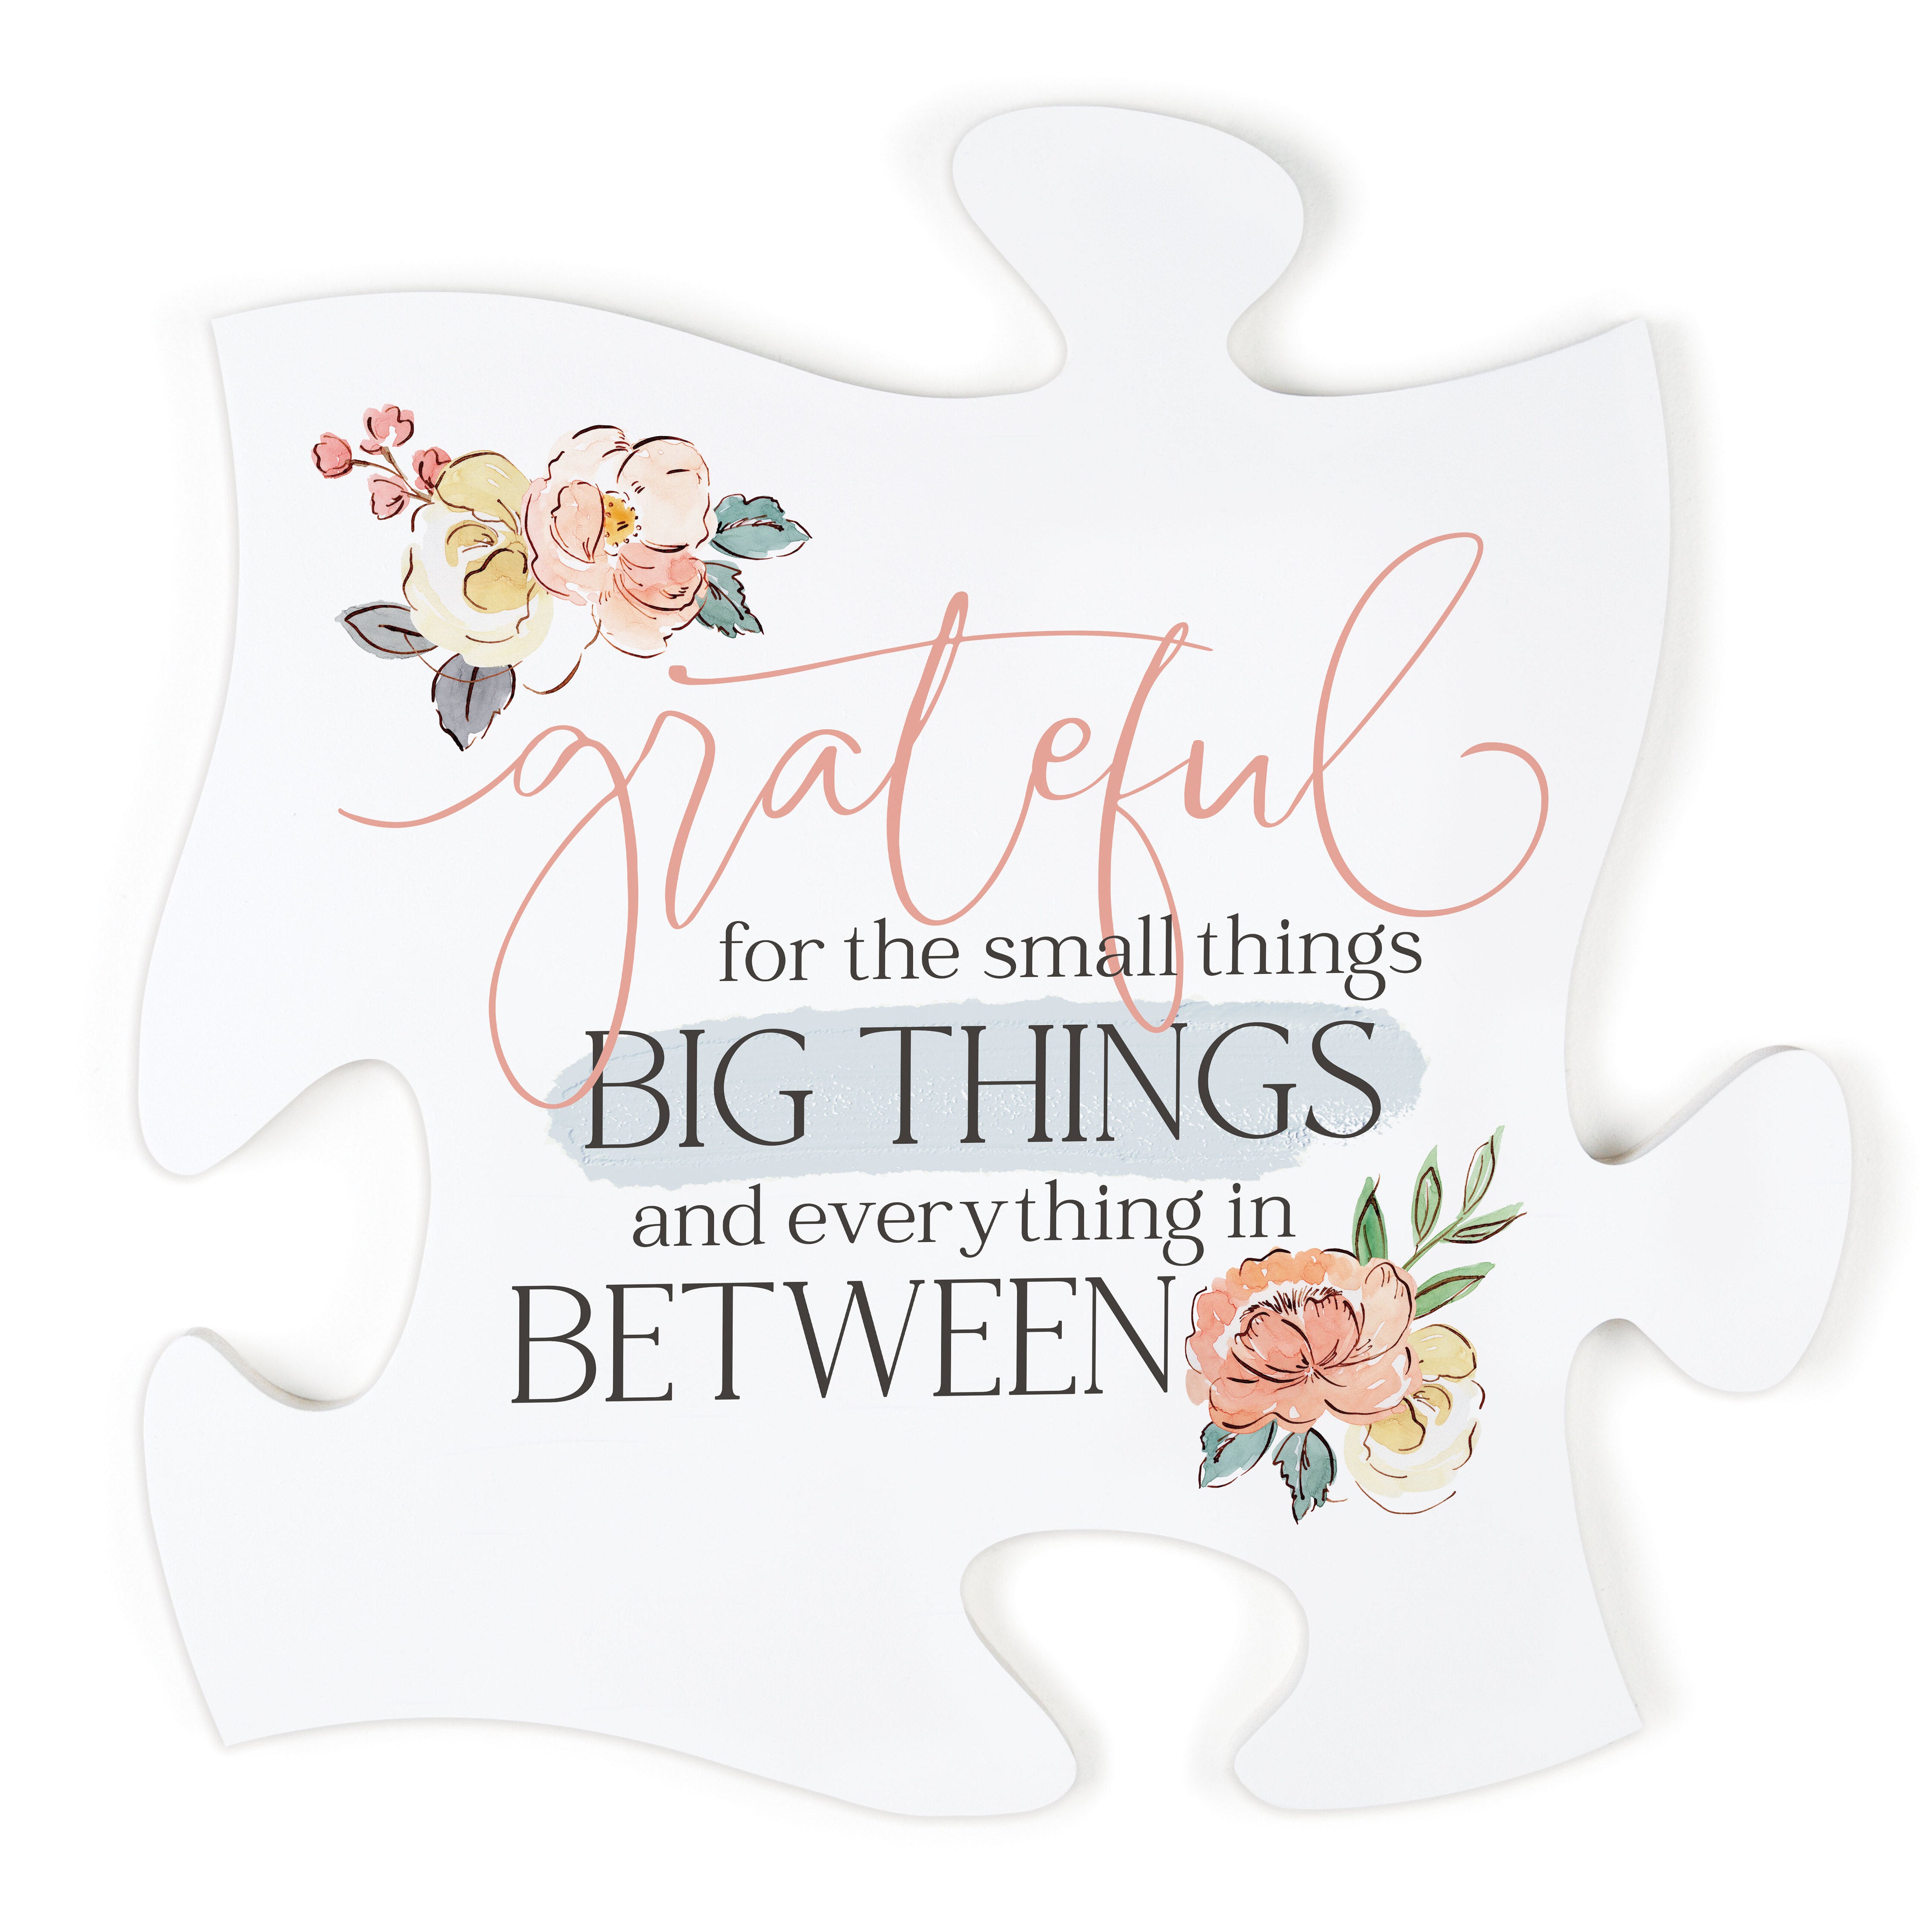 Grateful For The Small Things, Big Things Puzzle Piece Décor